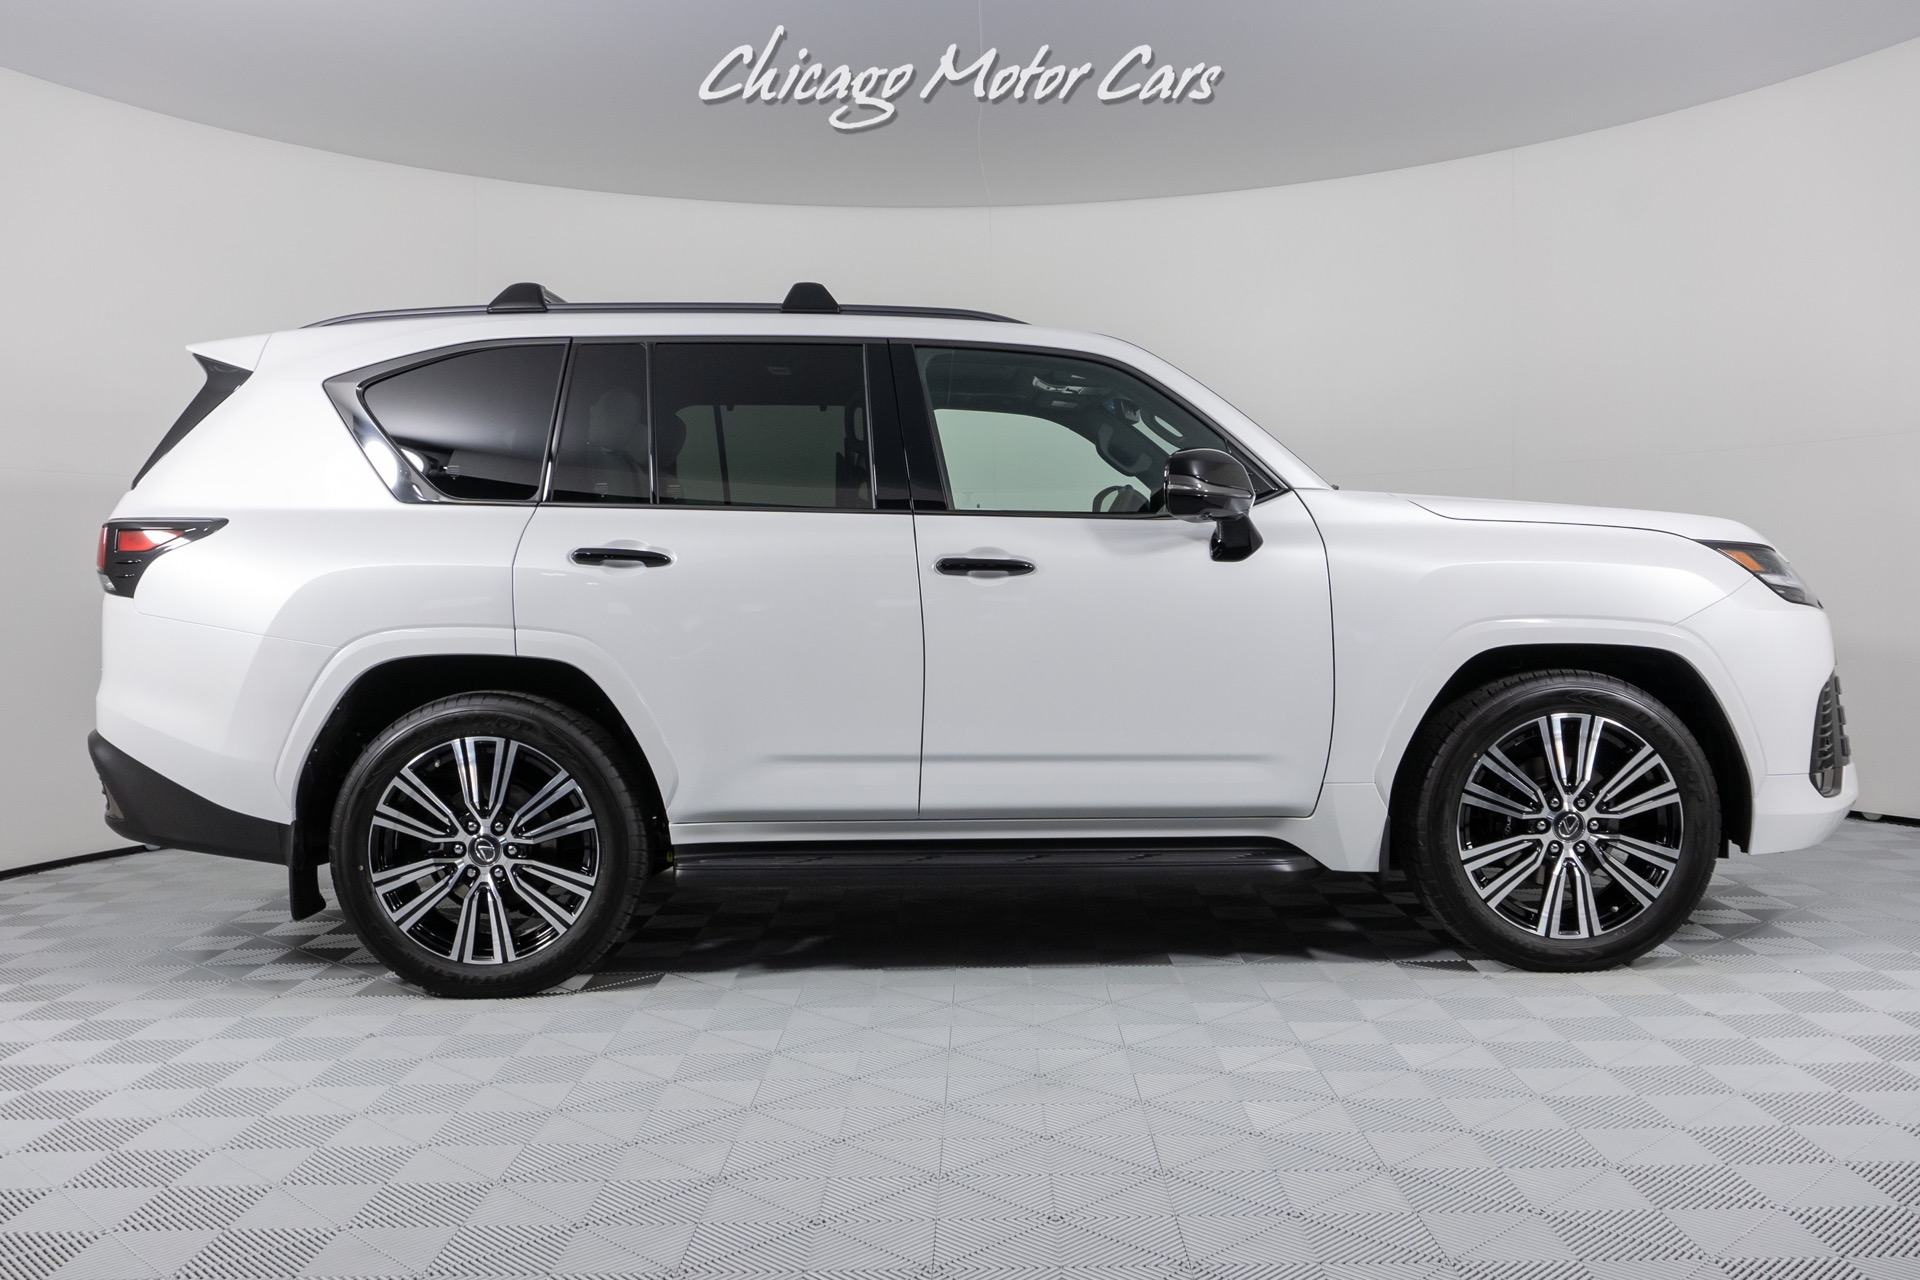 Used-2022-Lexus-LX600-Luxury-3rd-Row-SUV-power-moonroof-active-height-control-Only-13-Miles